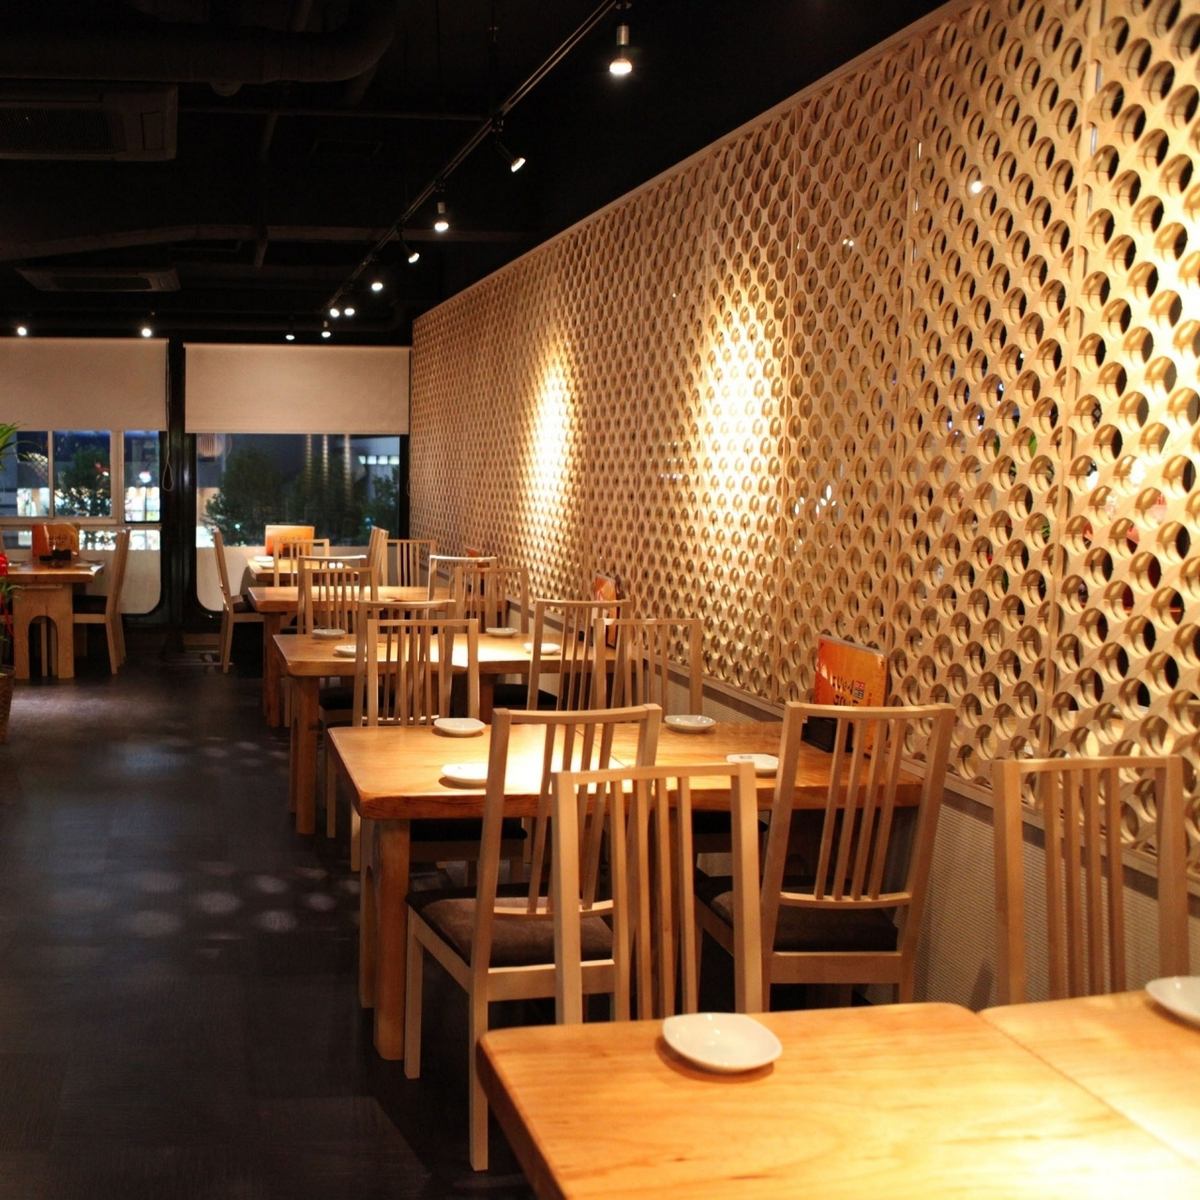 The samgyeopsal served in a stylish Korean cafe-style restaurant is delicious.